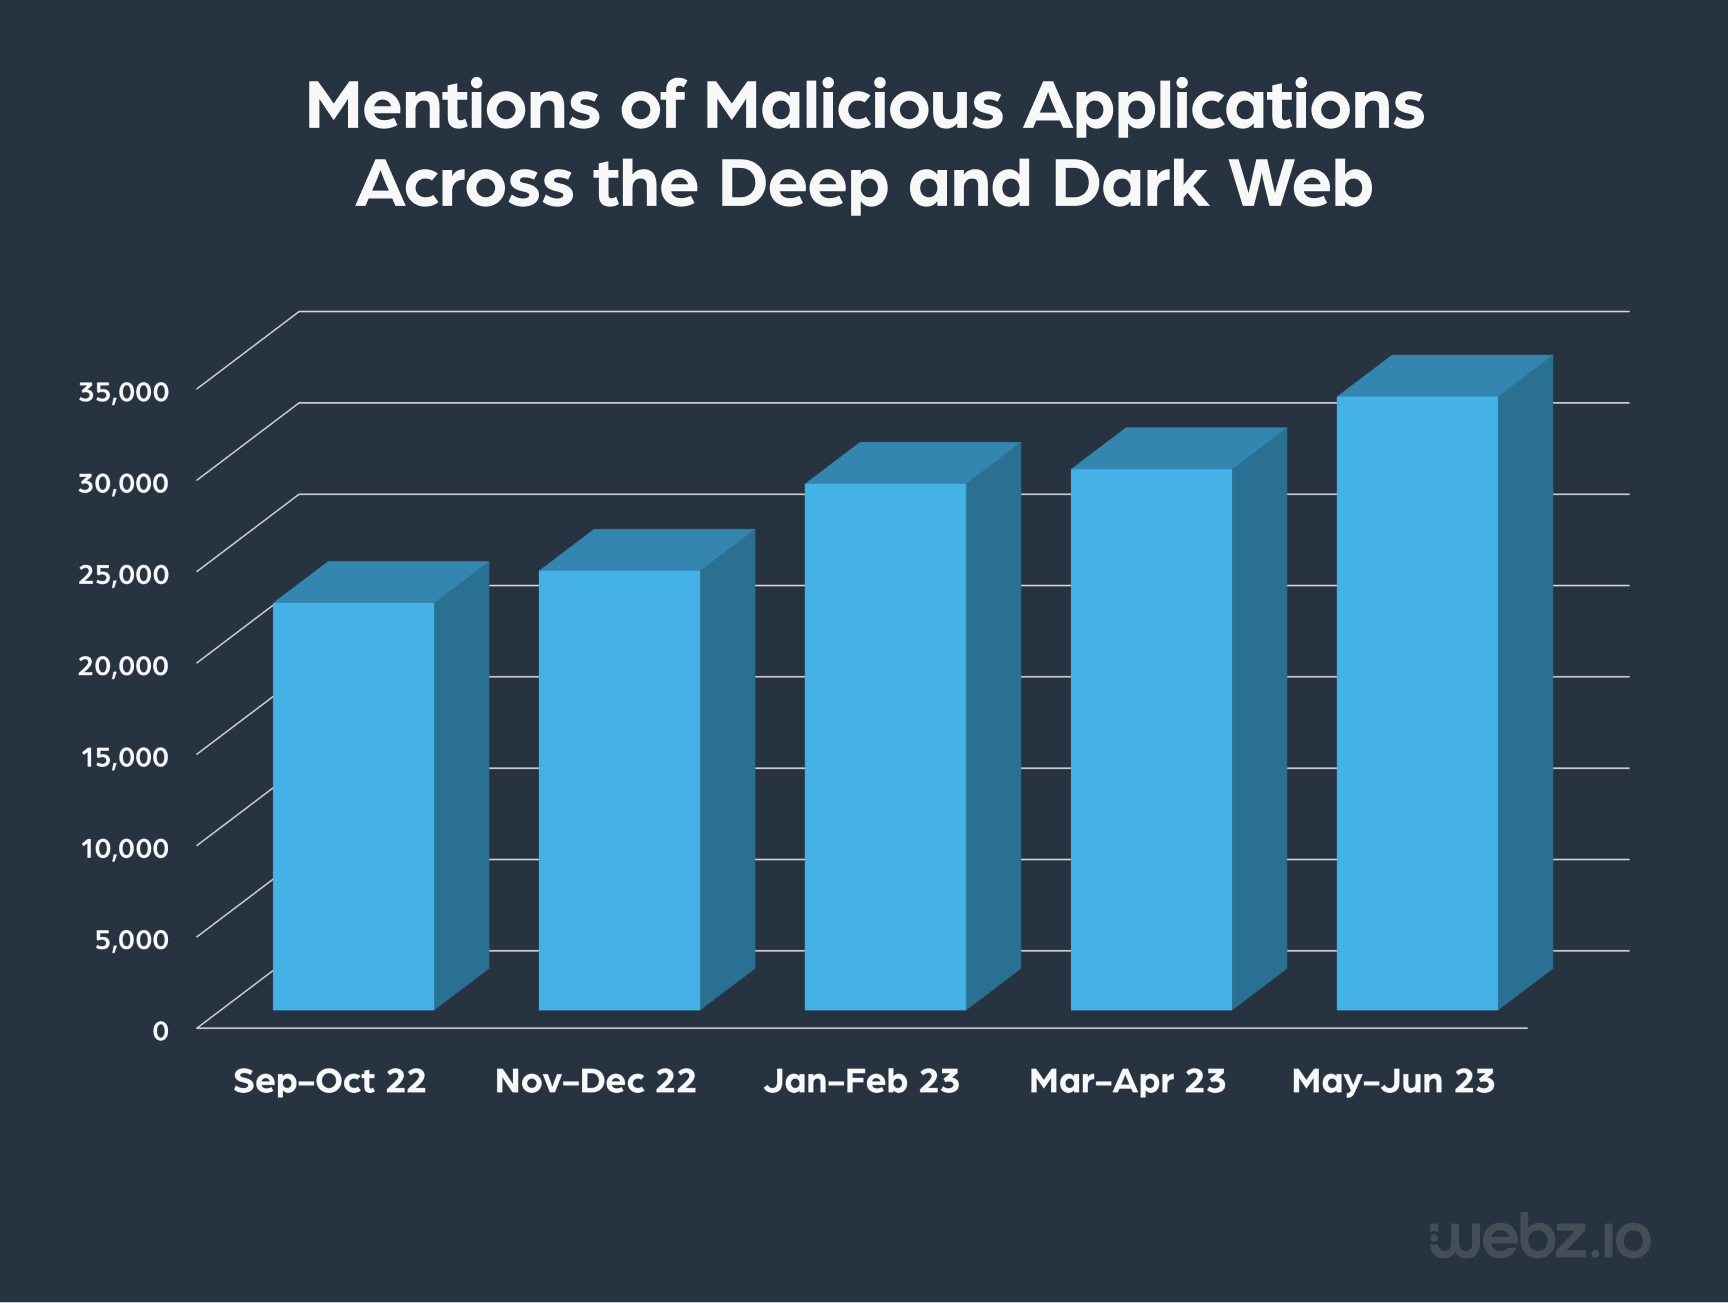 Mentions of malicious applications across the deep and dark web, the data is taken from Webz.io's Cyber API